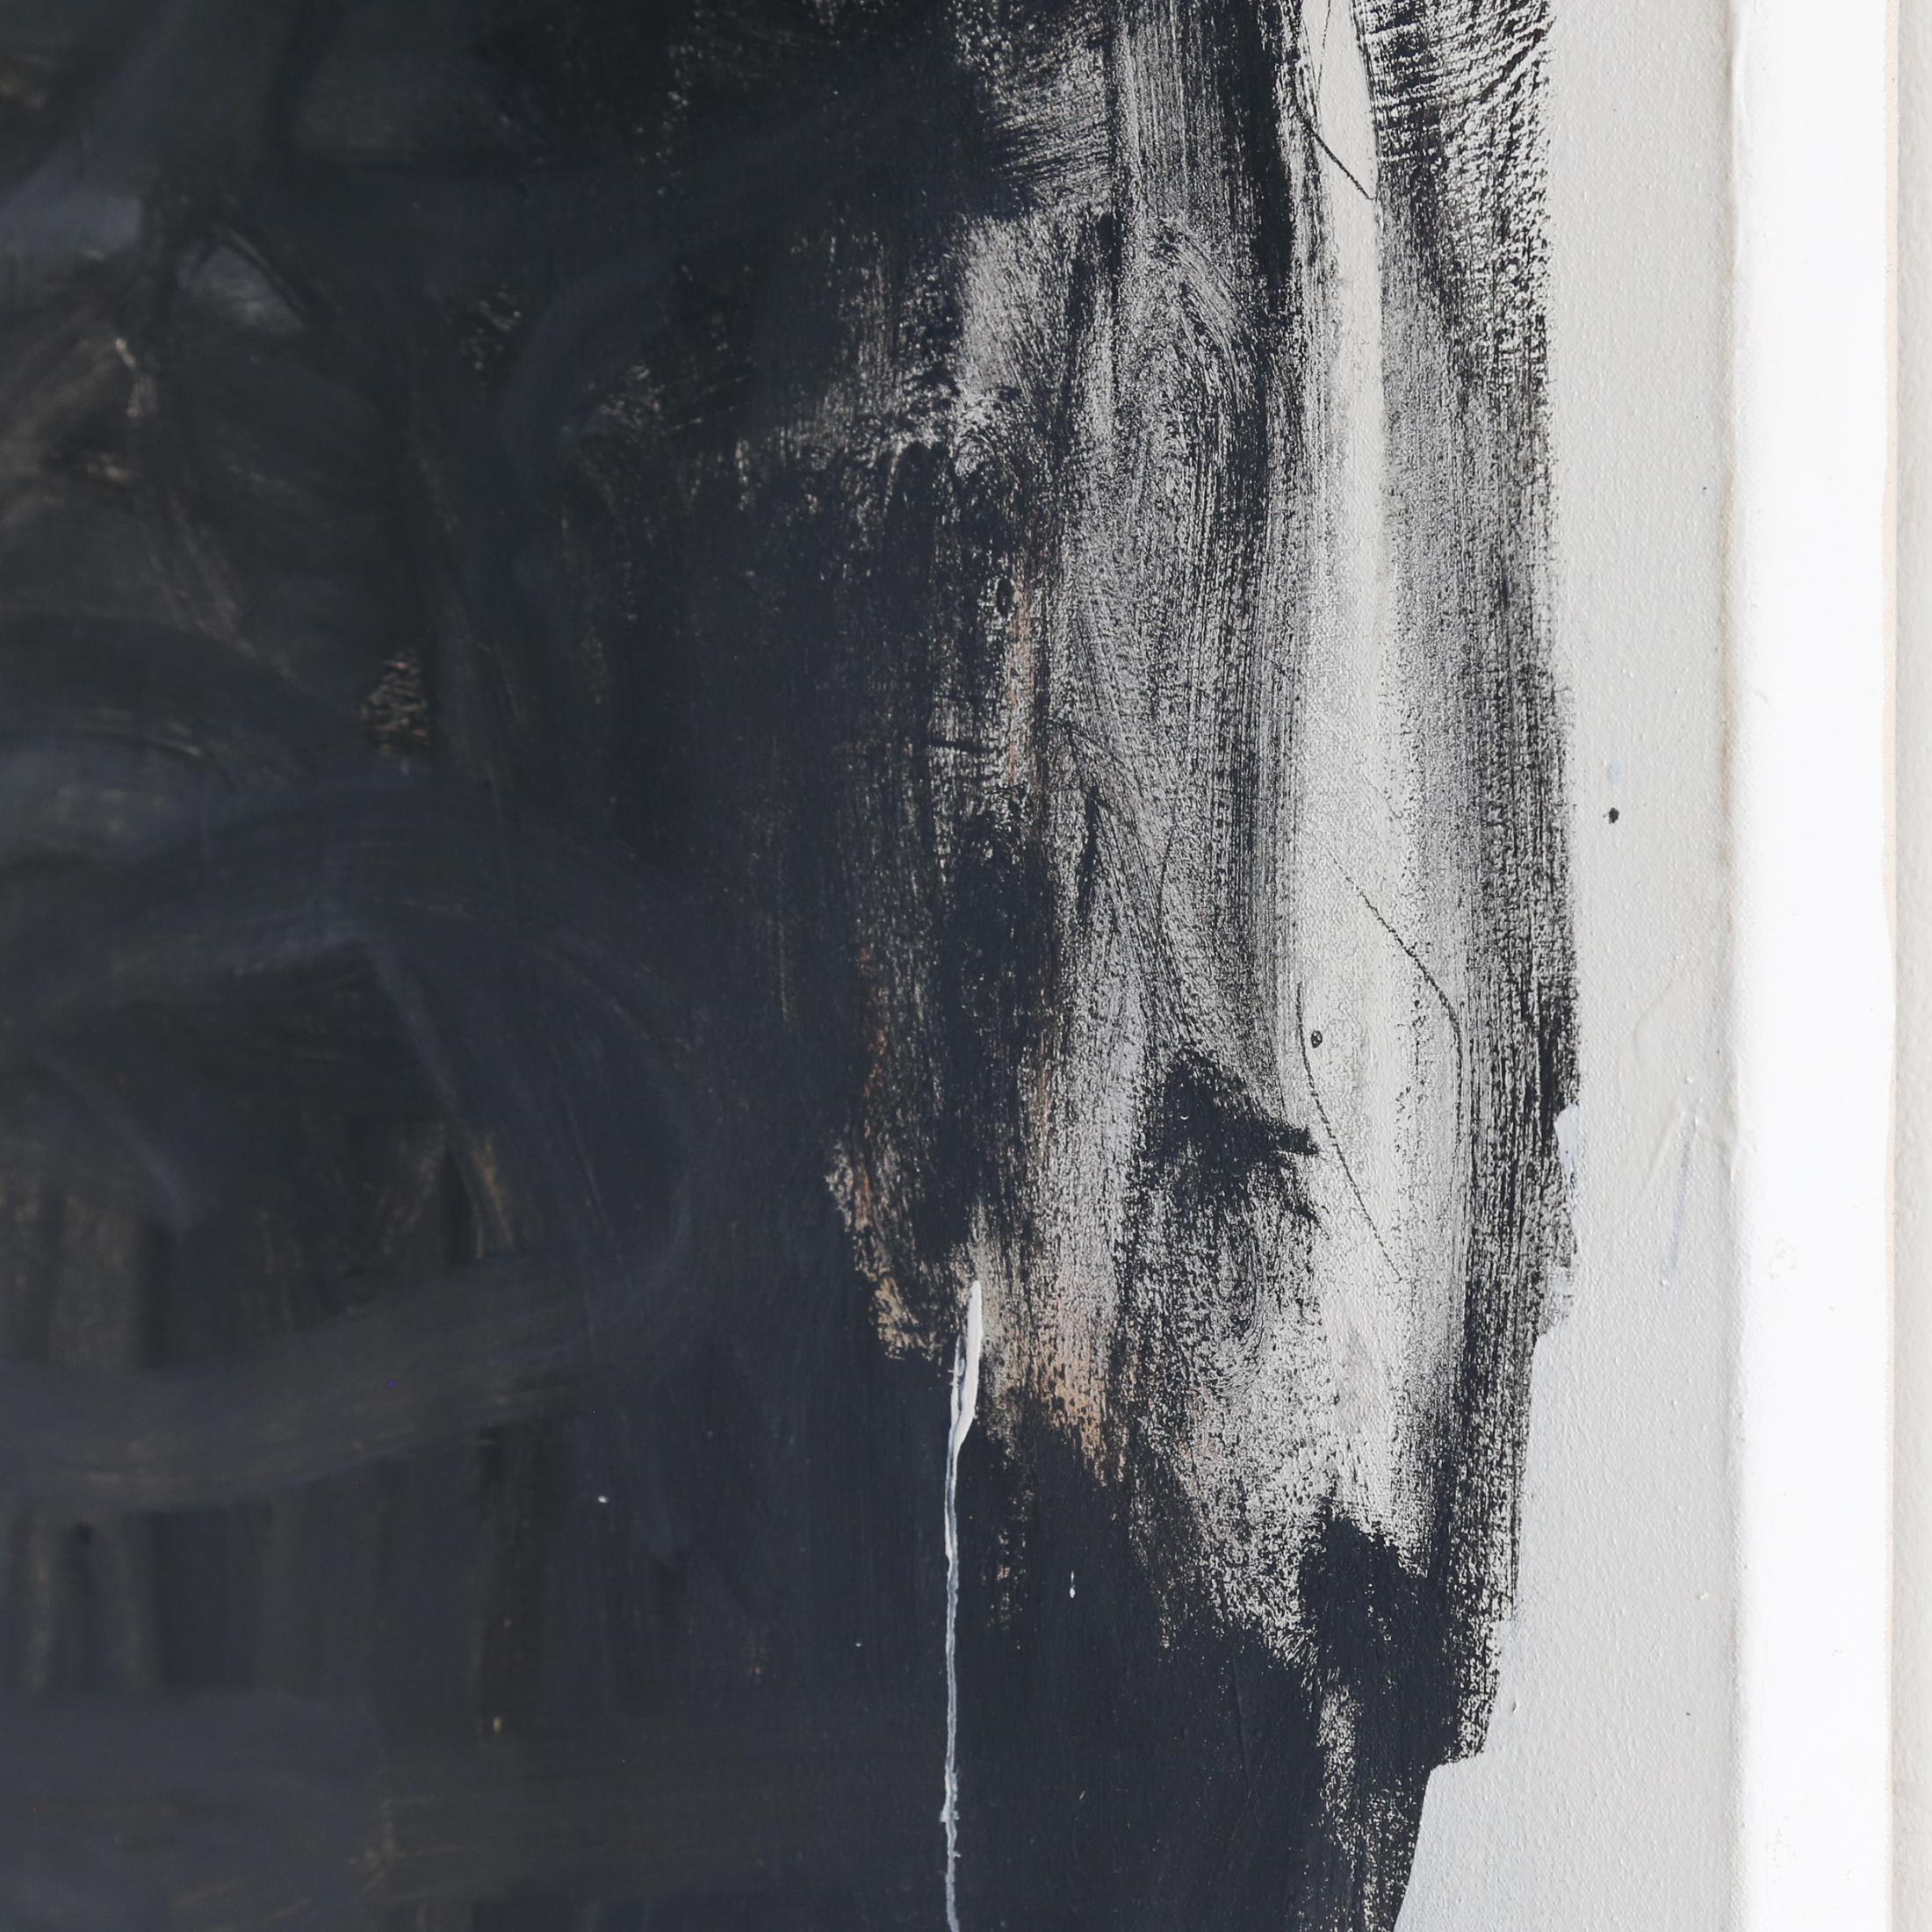 CHRIS BRANDELL
Black Marble 2
• oil, mixed media on canvas
50.00w x 60.00h x 2.00d in
$7,500.00